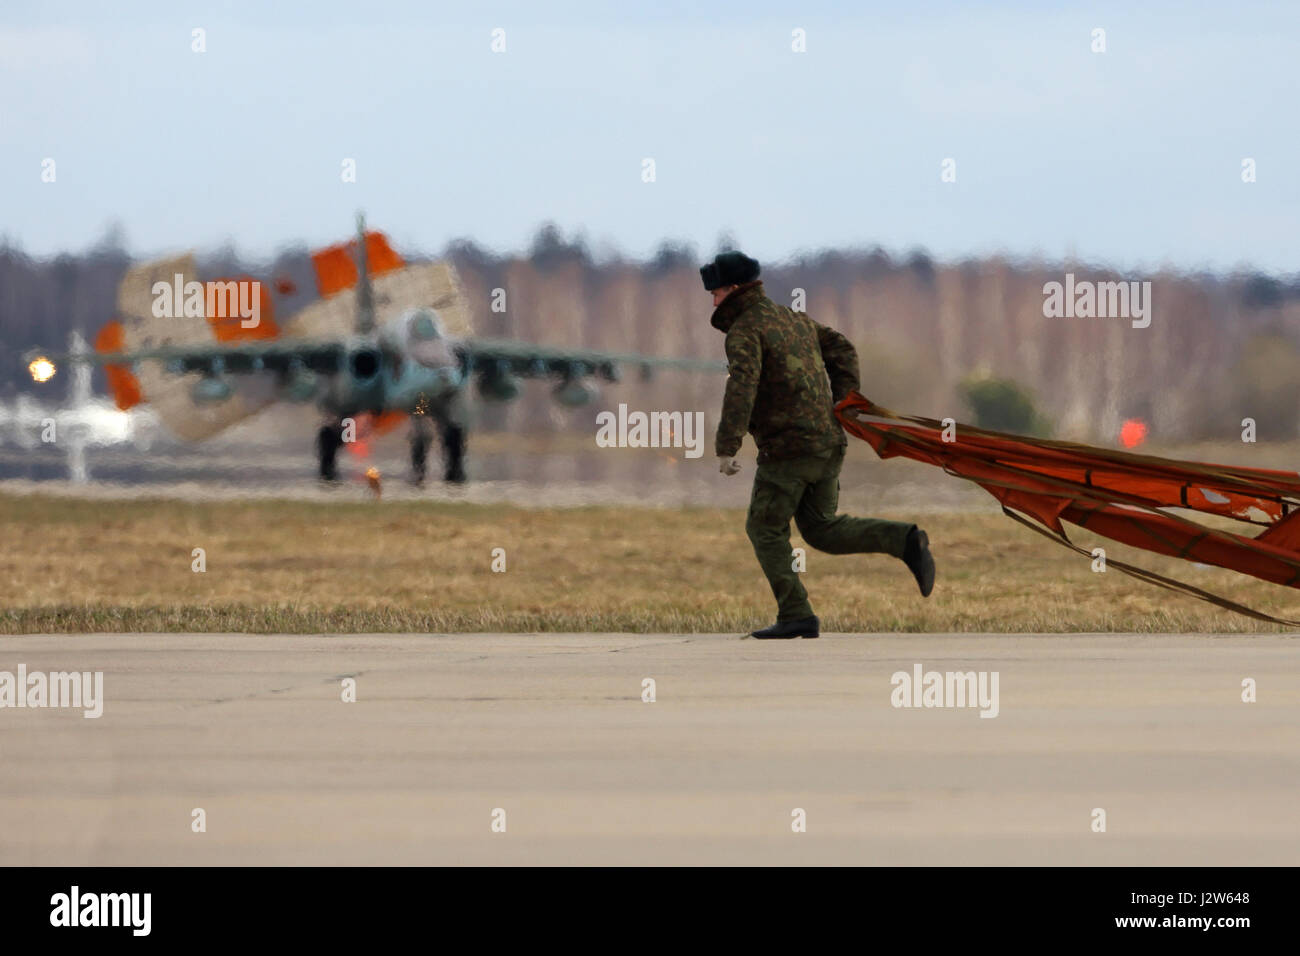 KUBINKA, MOSCOW REGION, RUSSIA - APRIL 24, 2017: Soldier picks up dropped parachute of Sukhoi Su-25 airplane of Russian air force during Victory Day p Stock Photo